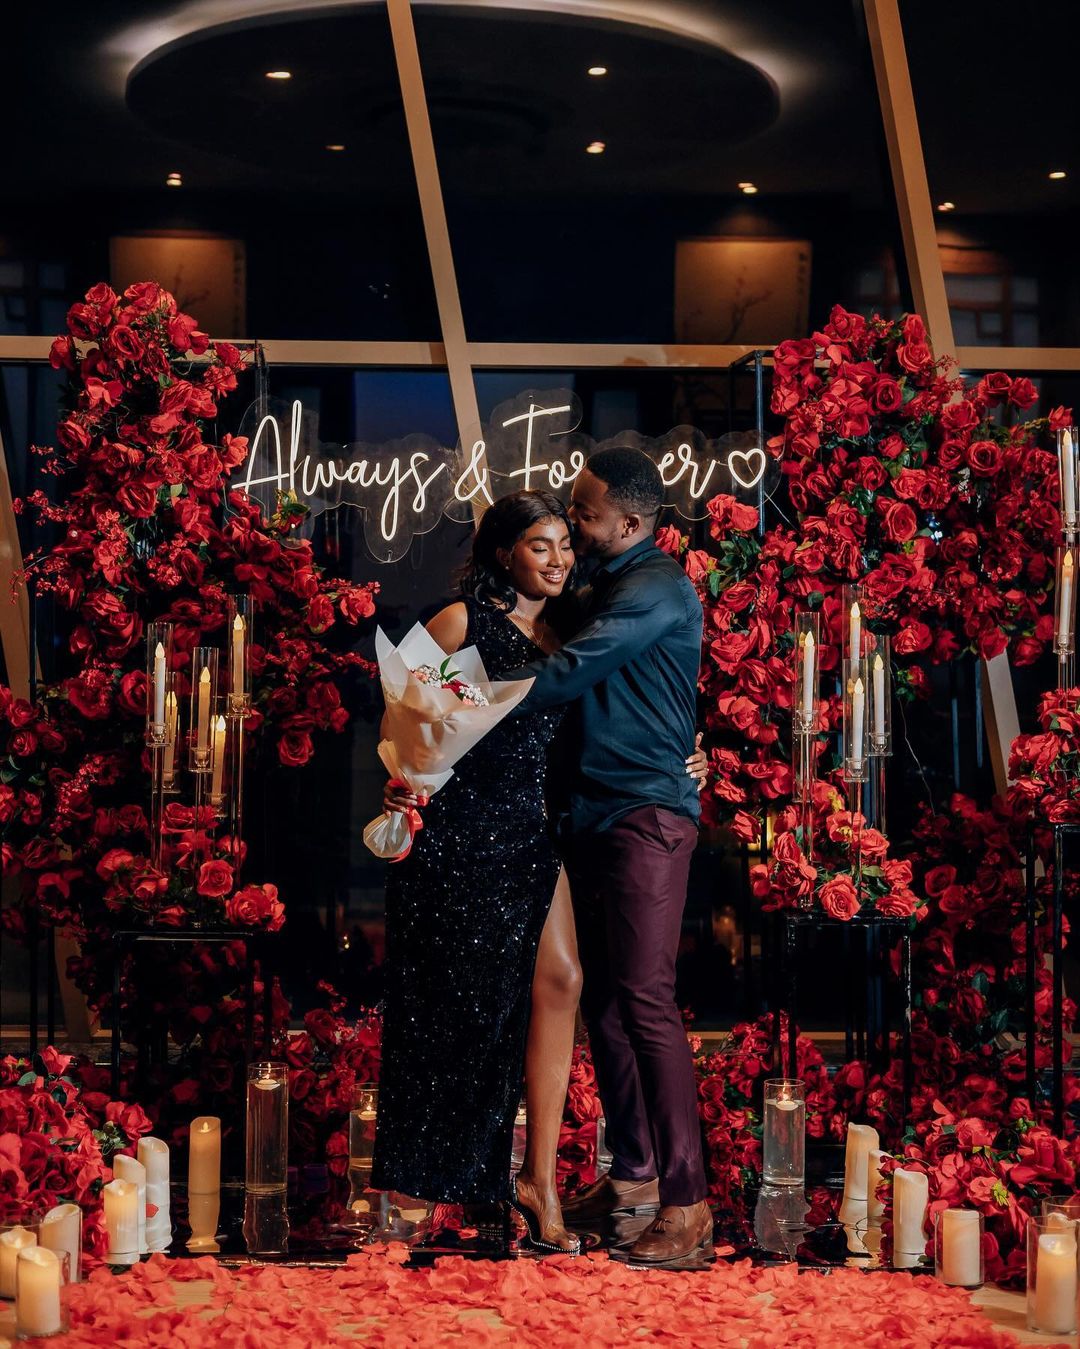 It’s All Sparks and Butterflies With This Couple’s Romantic Proposal Video